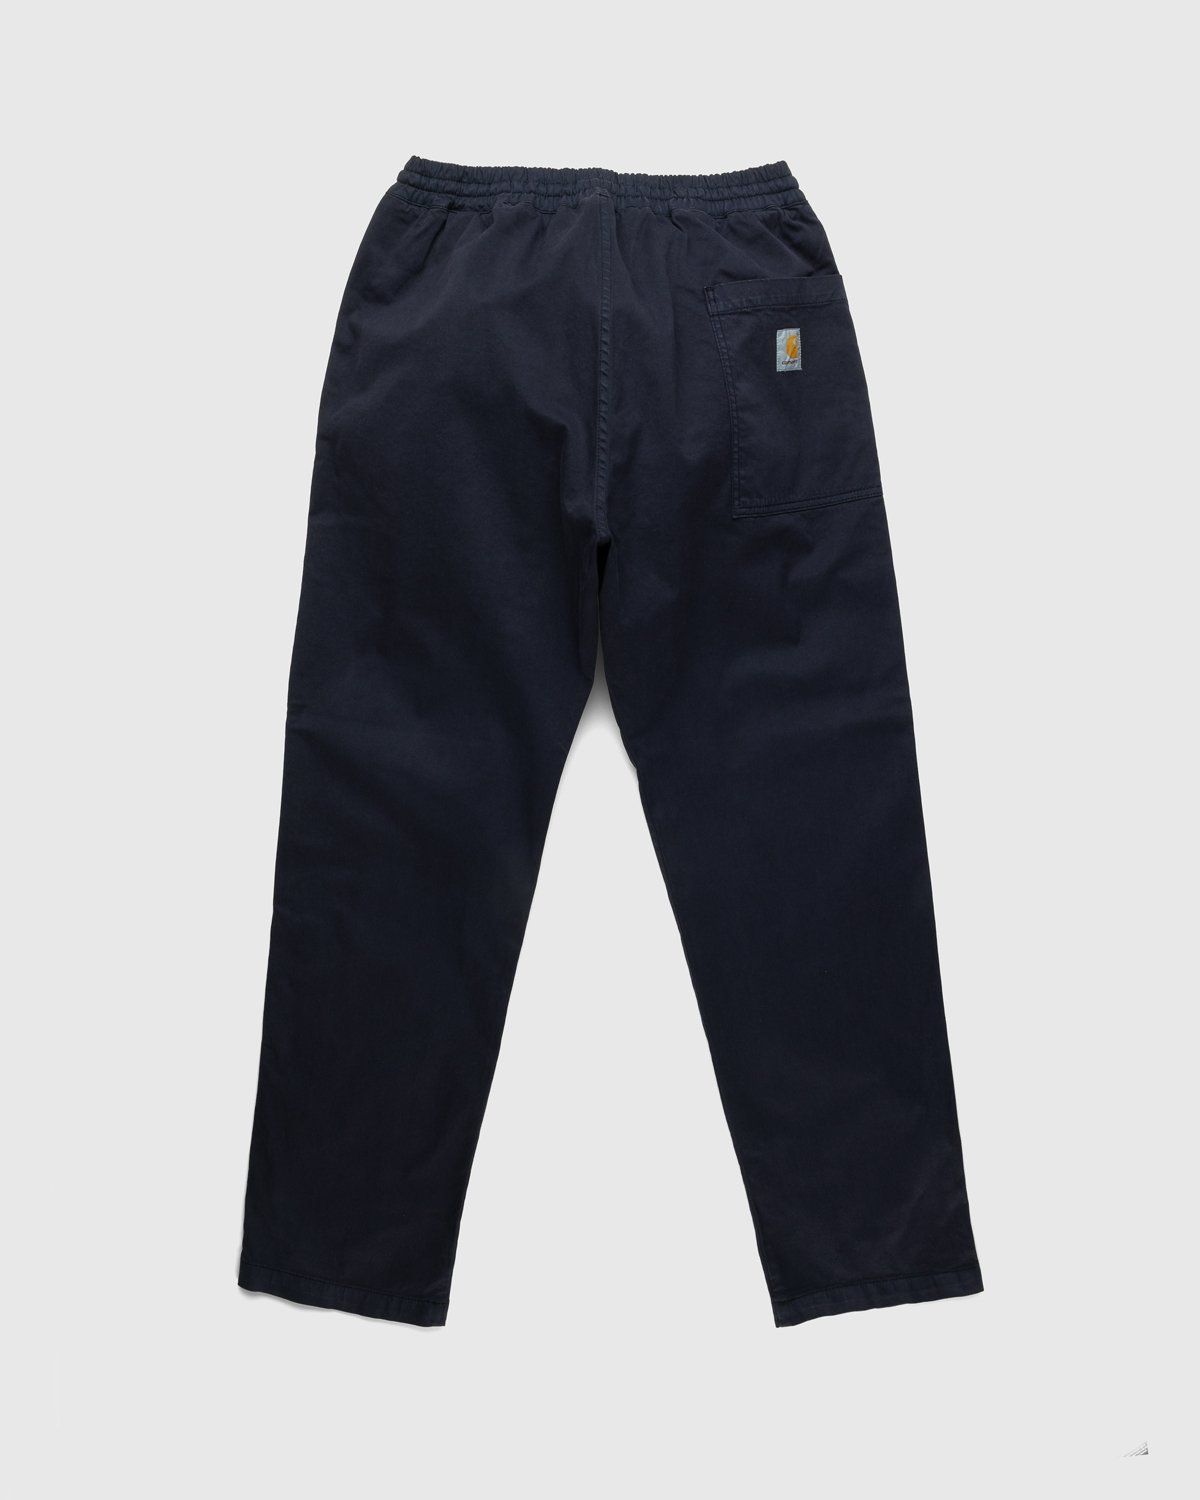 Carhartt WIP – Lawton Pant Navy - Trousers - Blue - Image 2